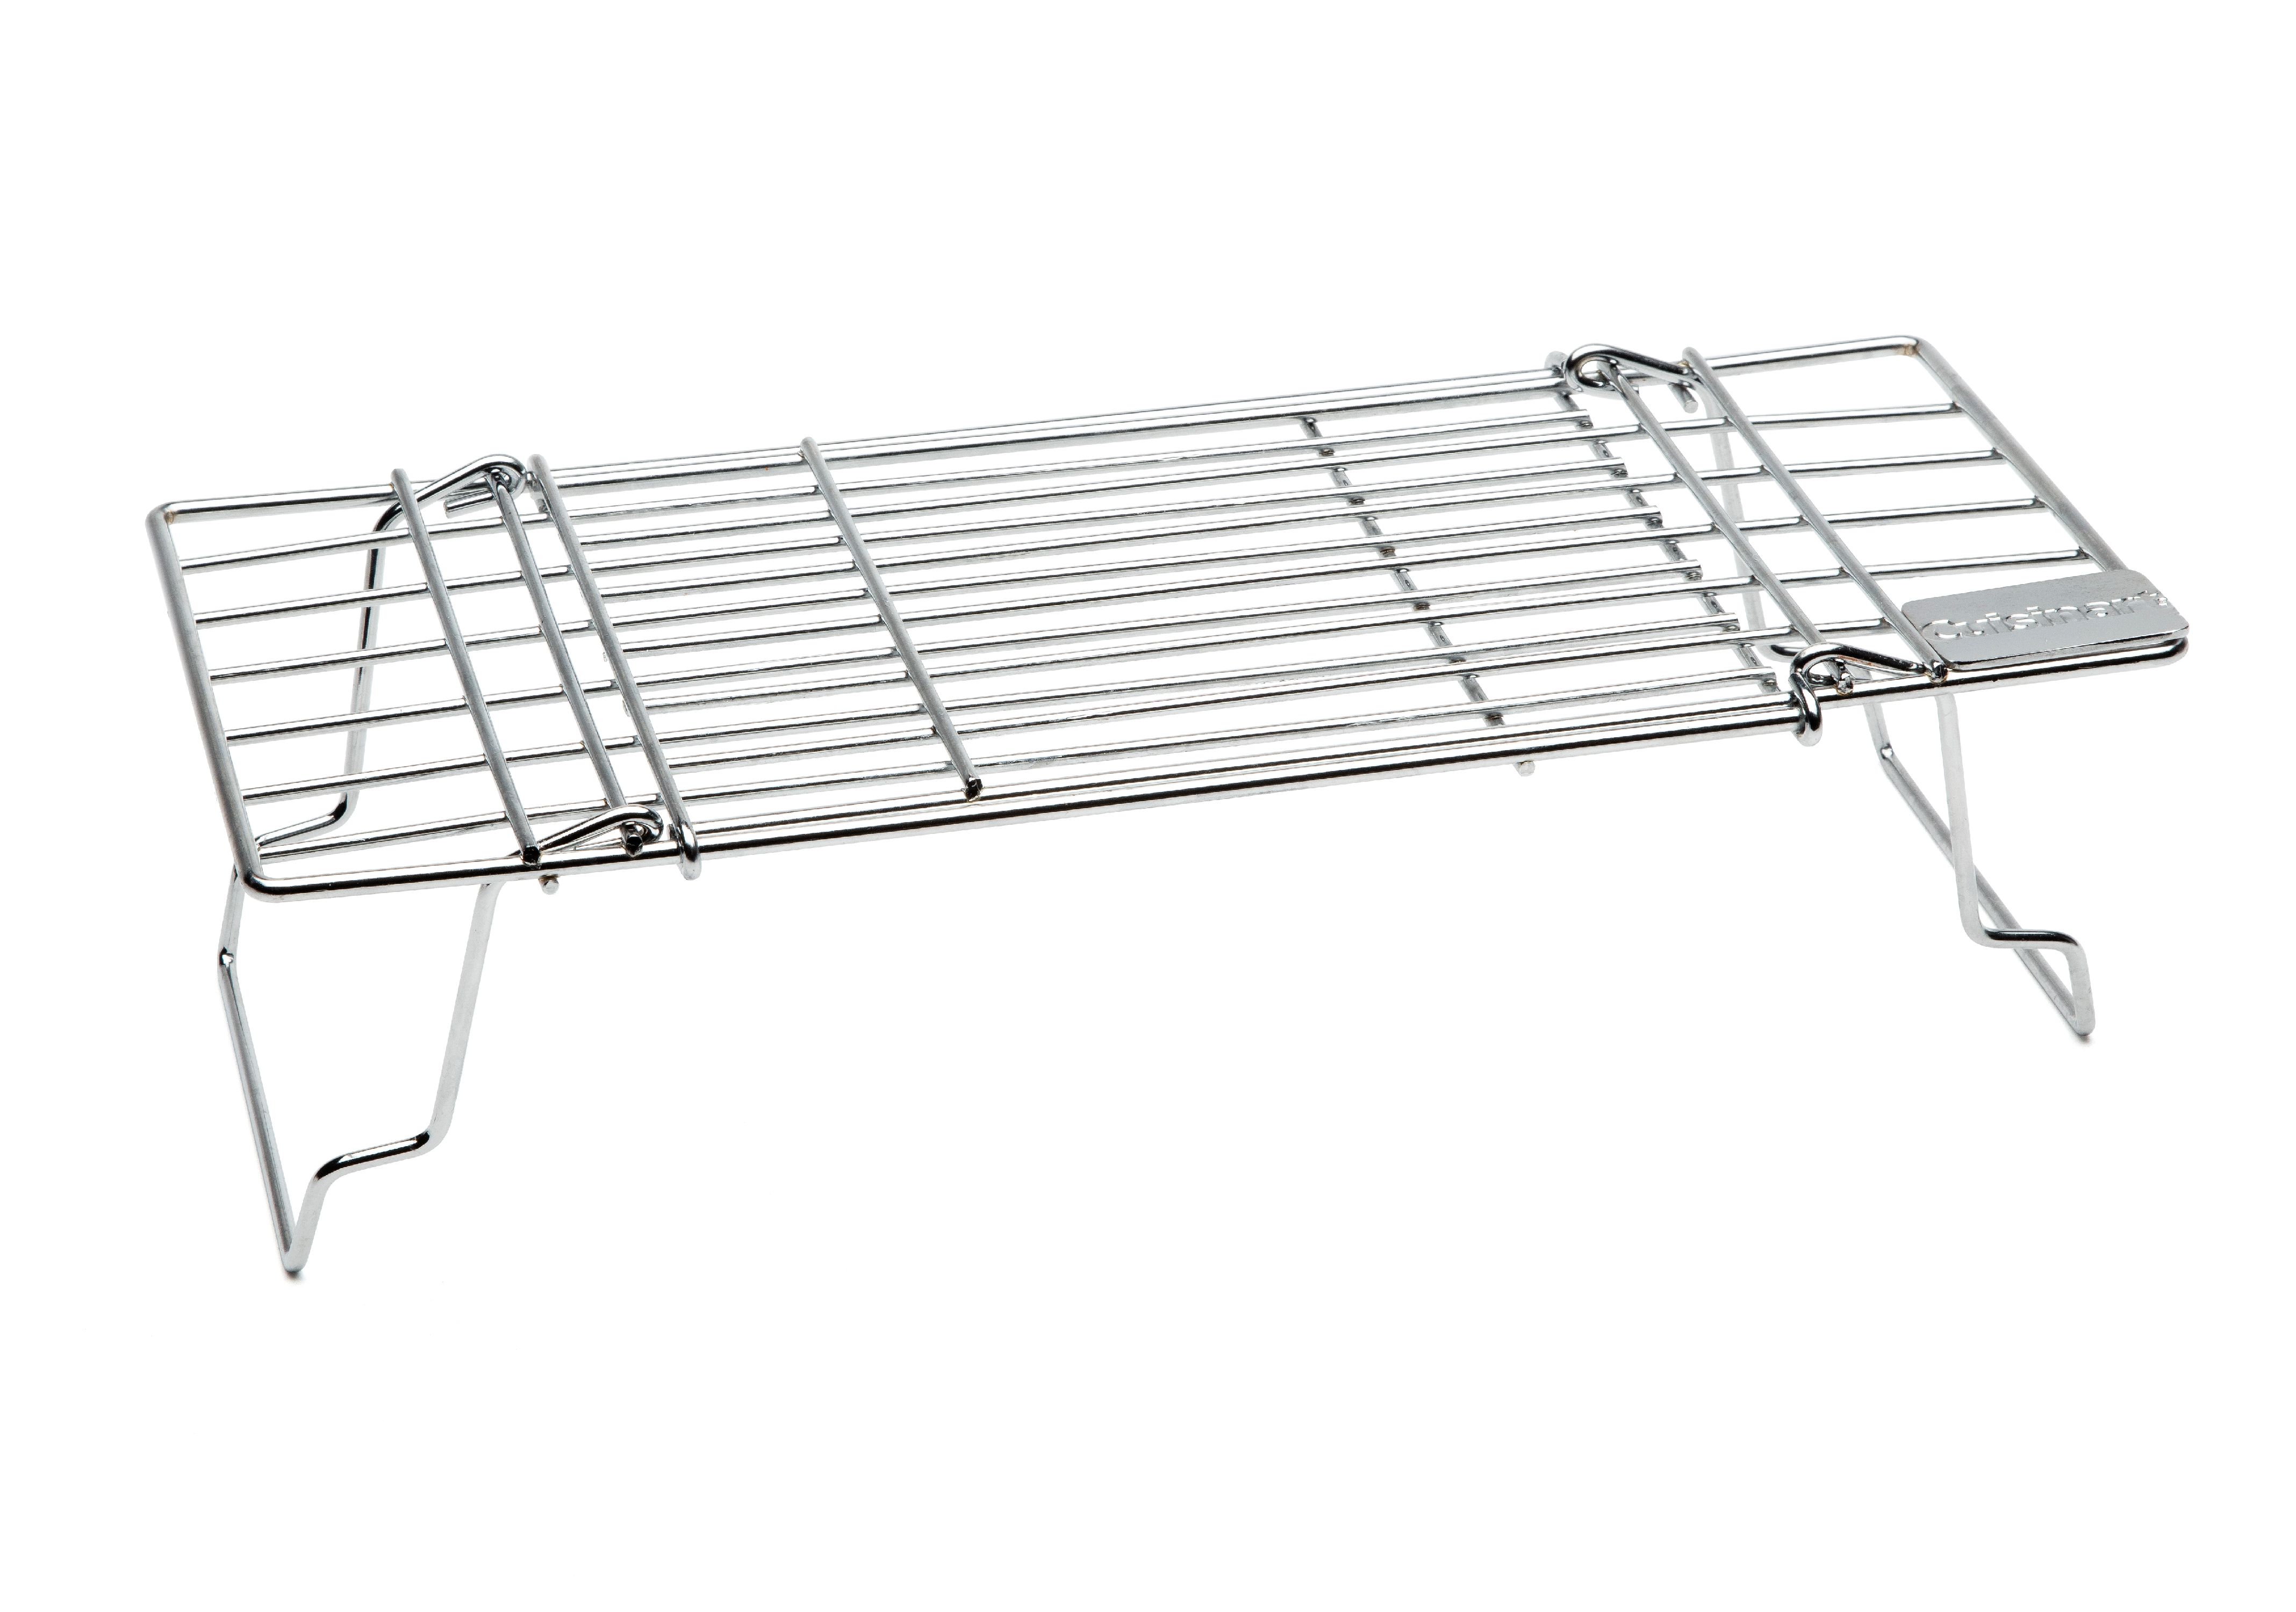 Cuisinart Universal Grill Warming Rack - Extends from 15.5" to 21.75" - image 1 of 5